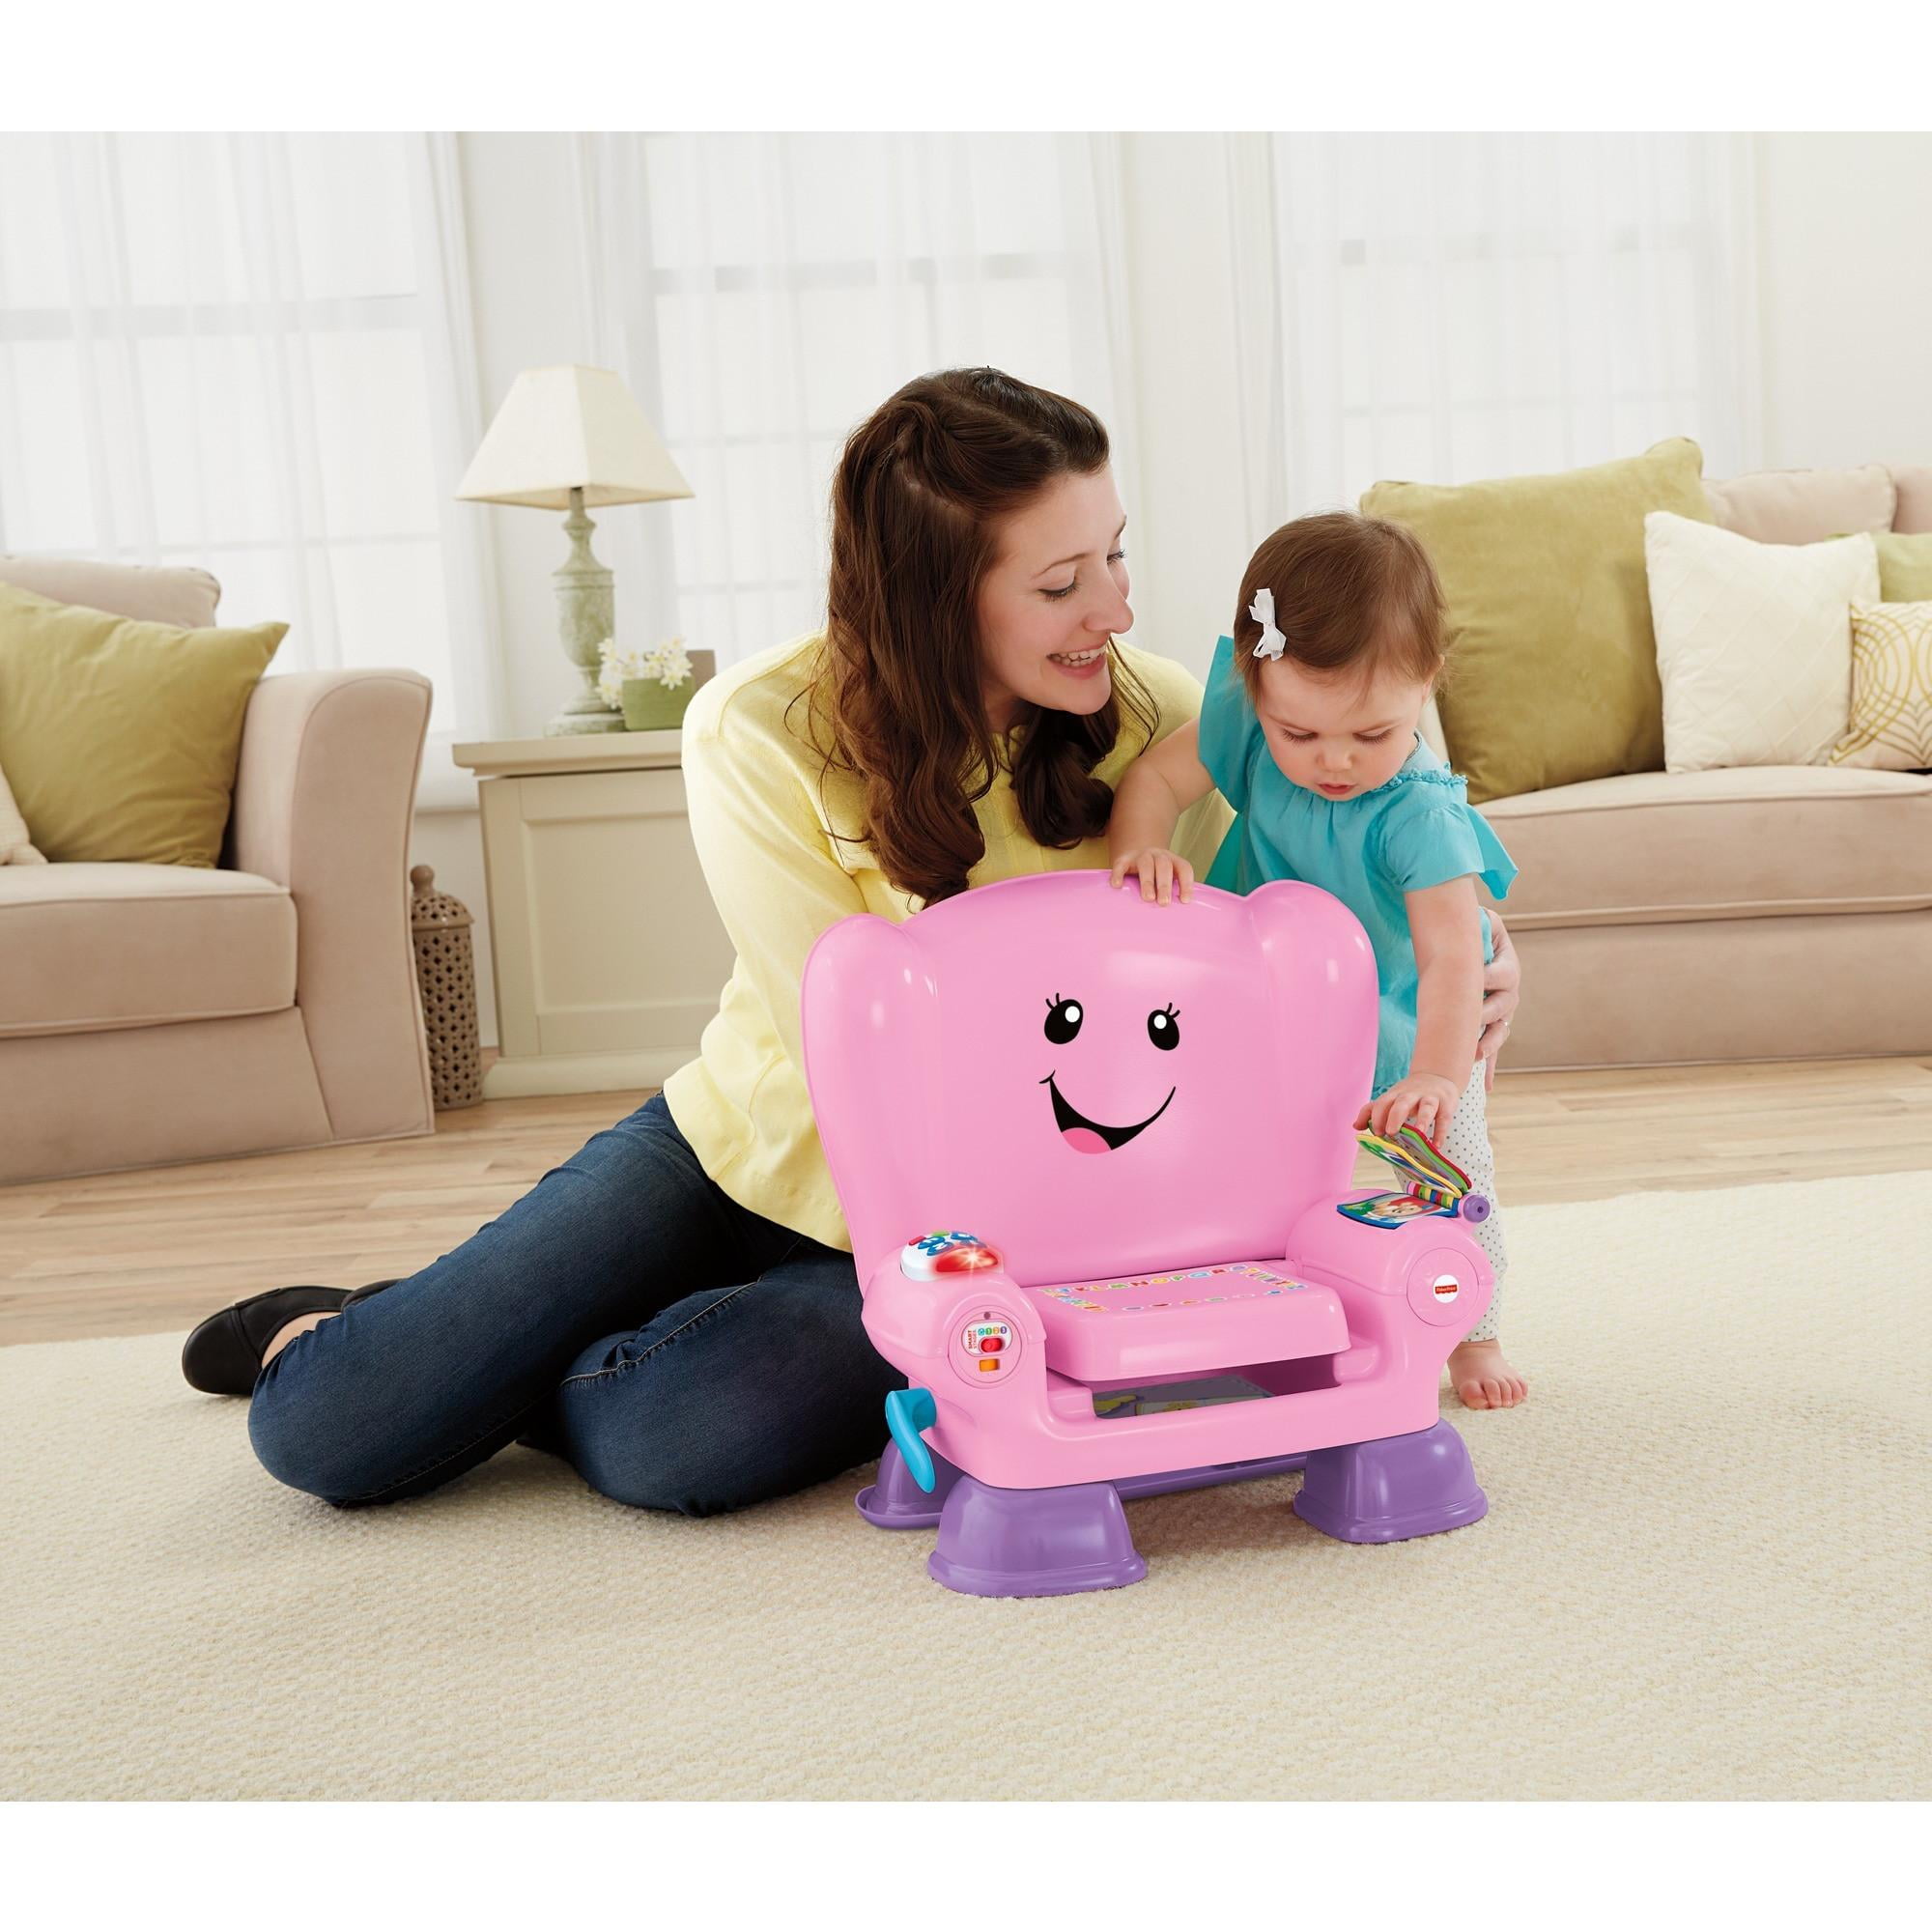 fisher price activity chair pink